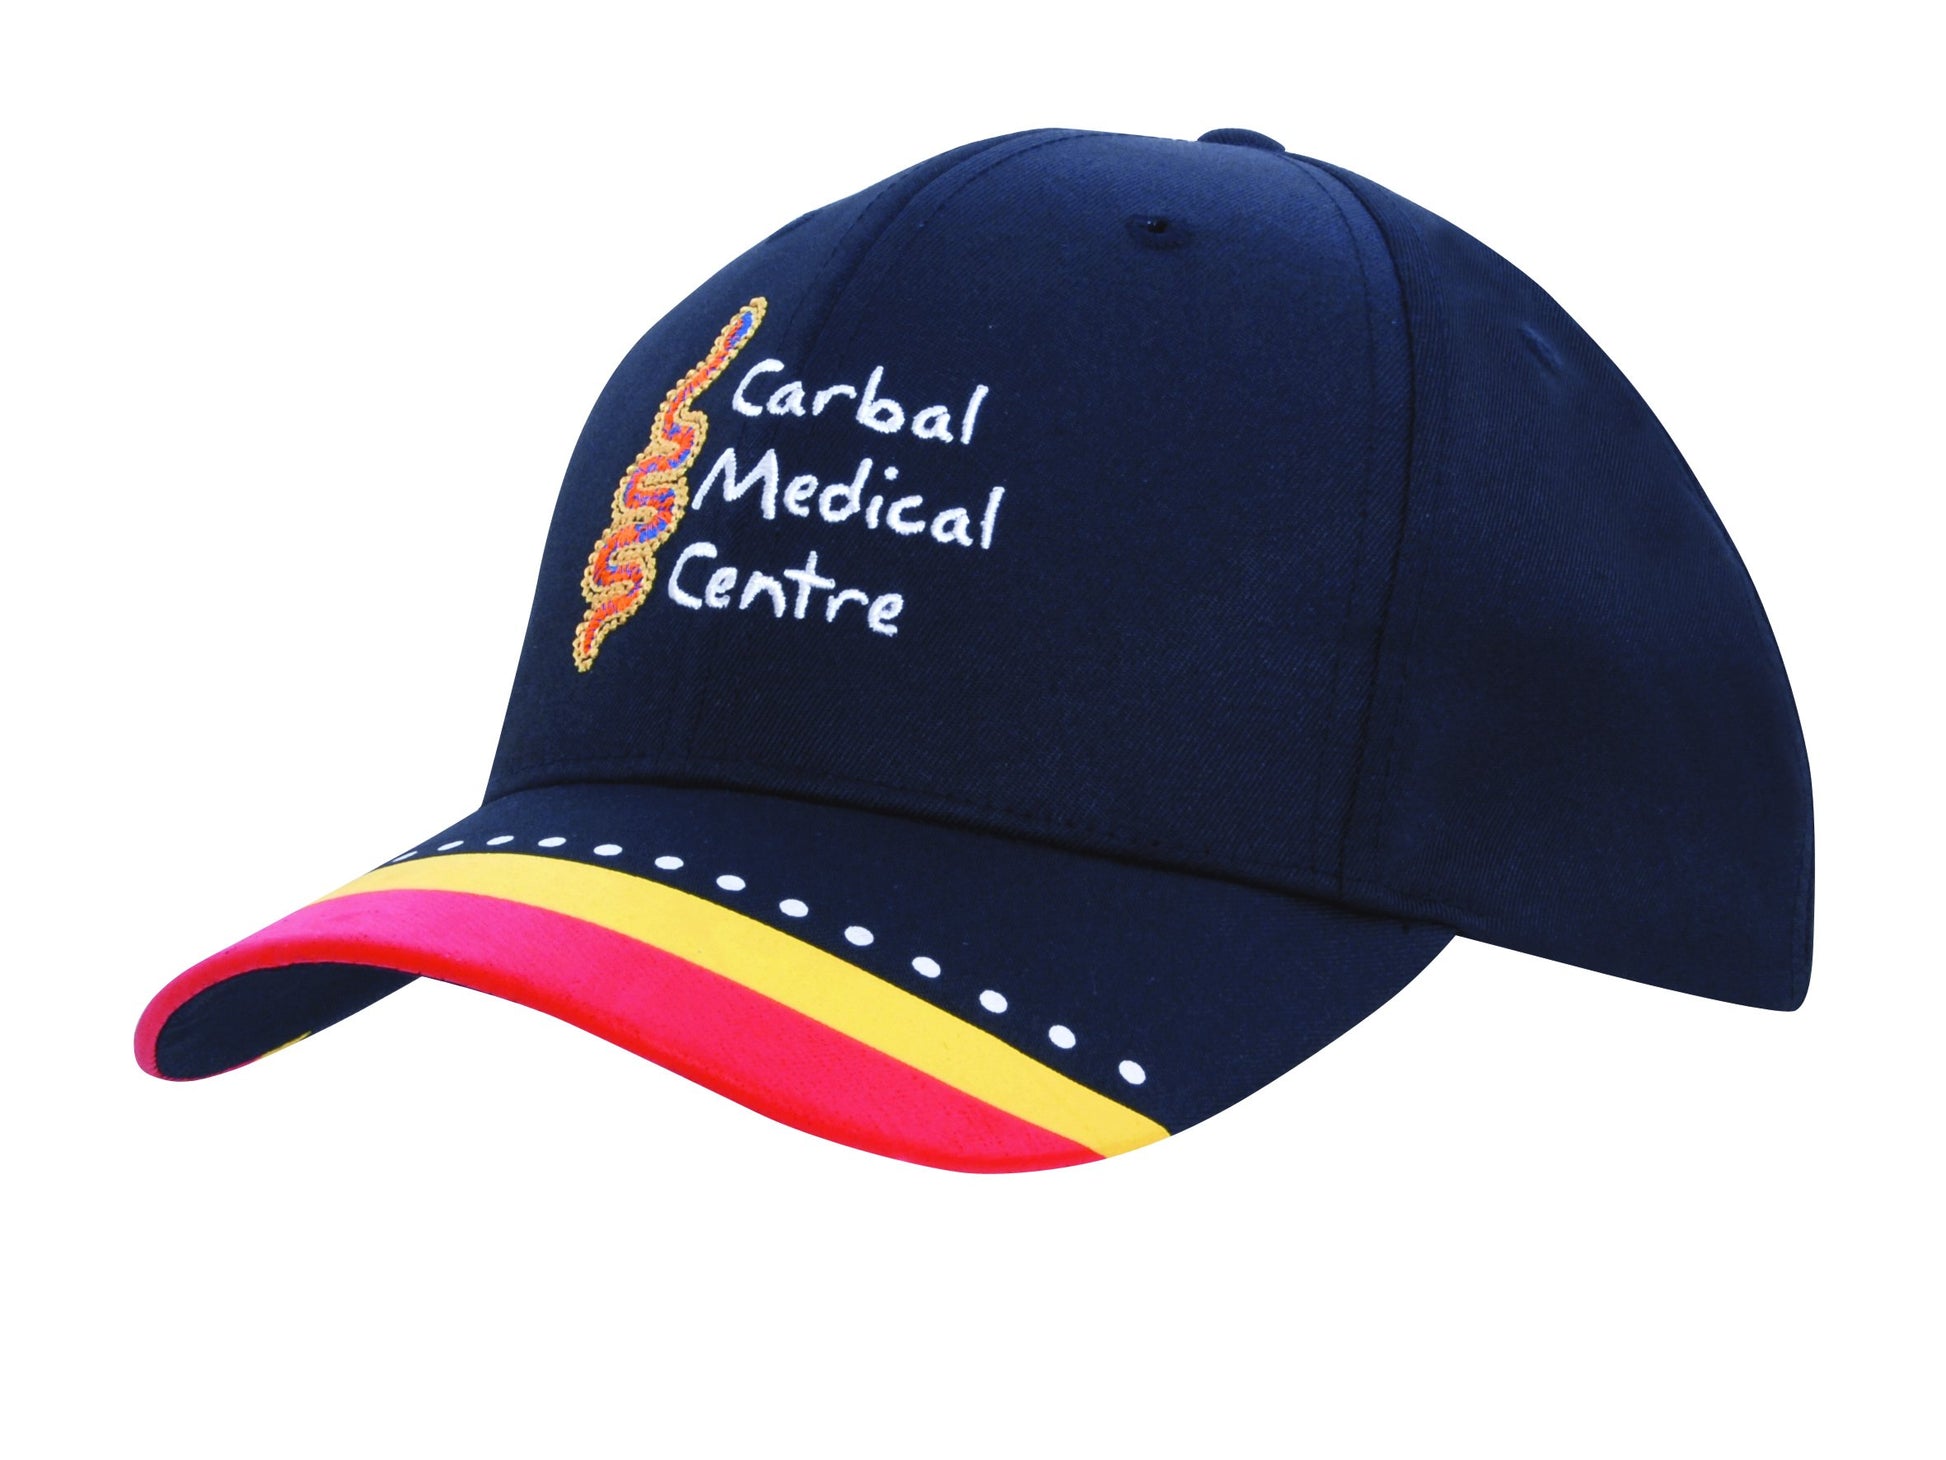 Headwear Breathable Poly Twill with Multi Coloured Printed Peak (4219)